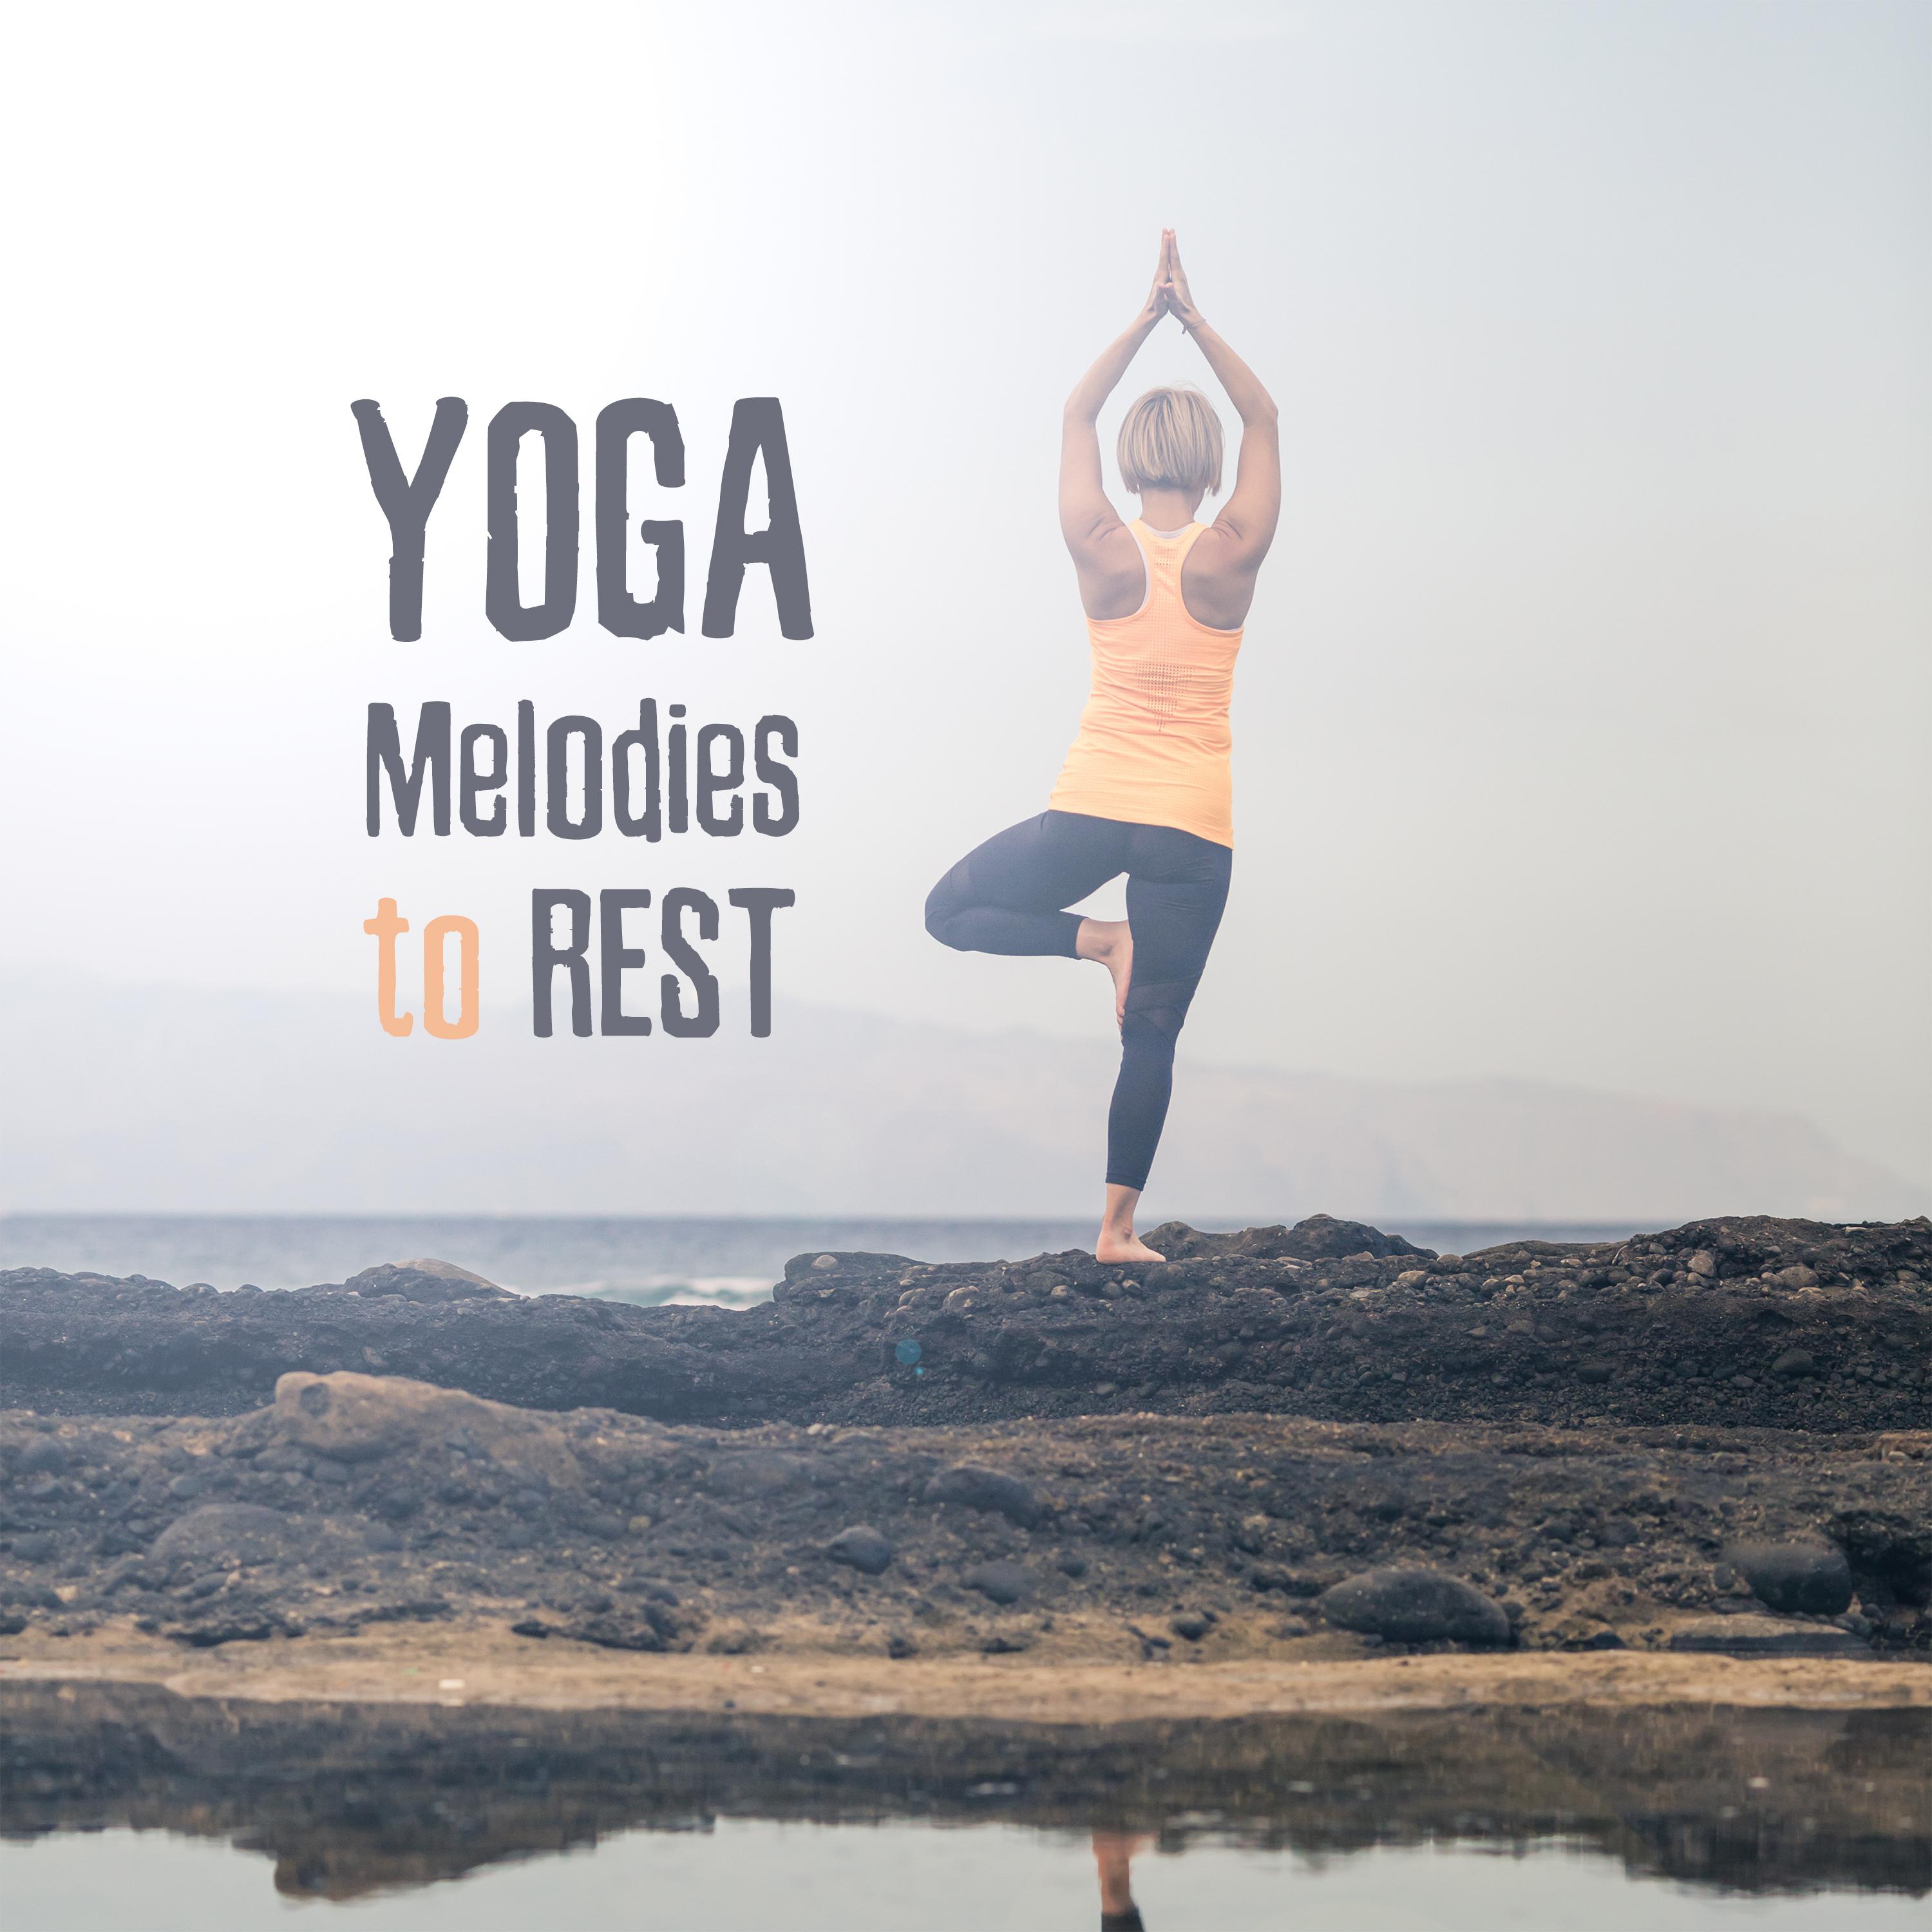 Yoga Melodies to Rest